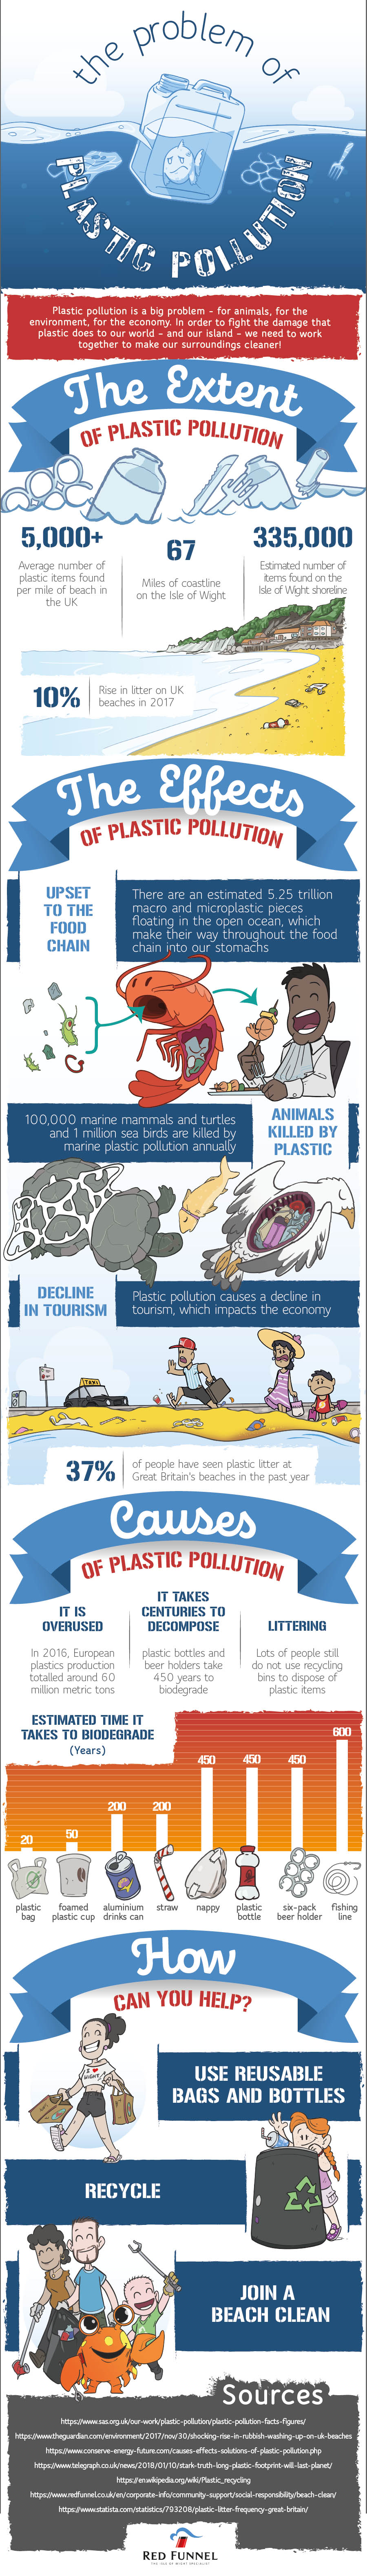 The Problem of Plastic Pollution